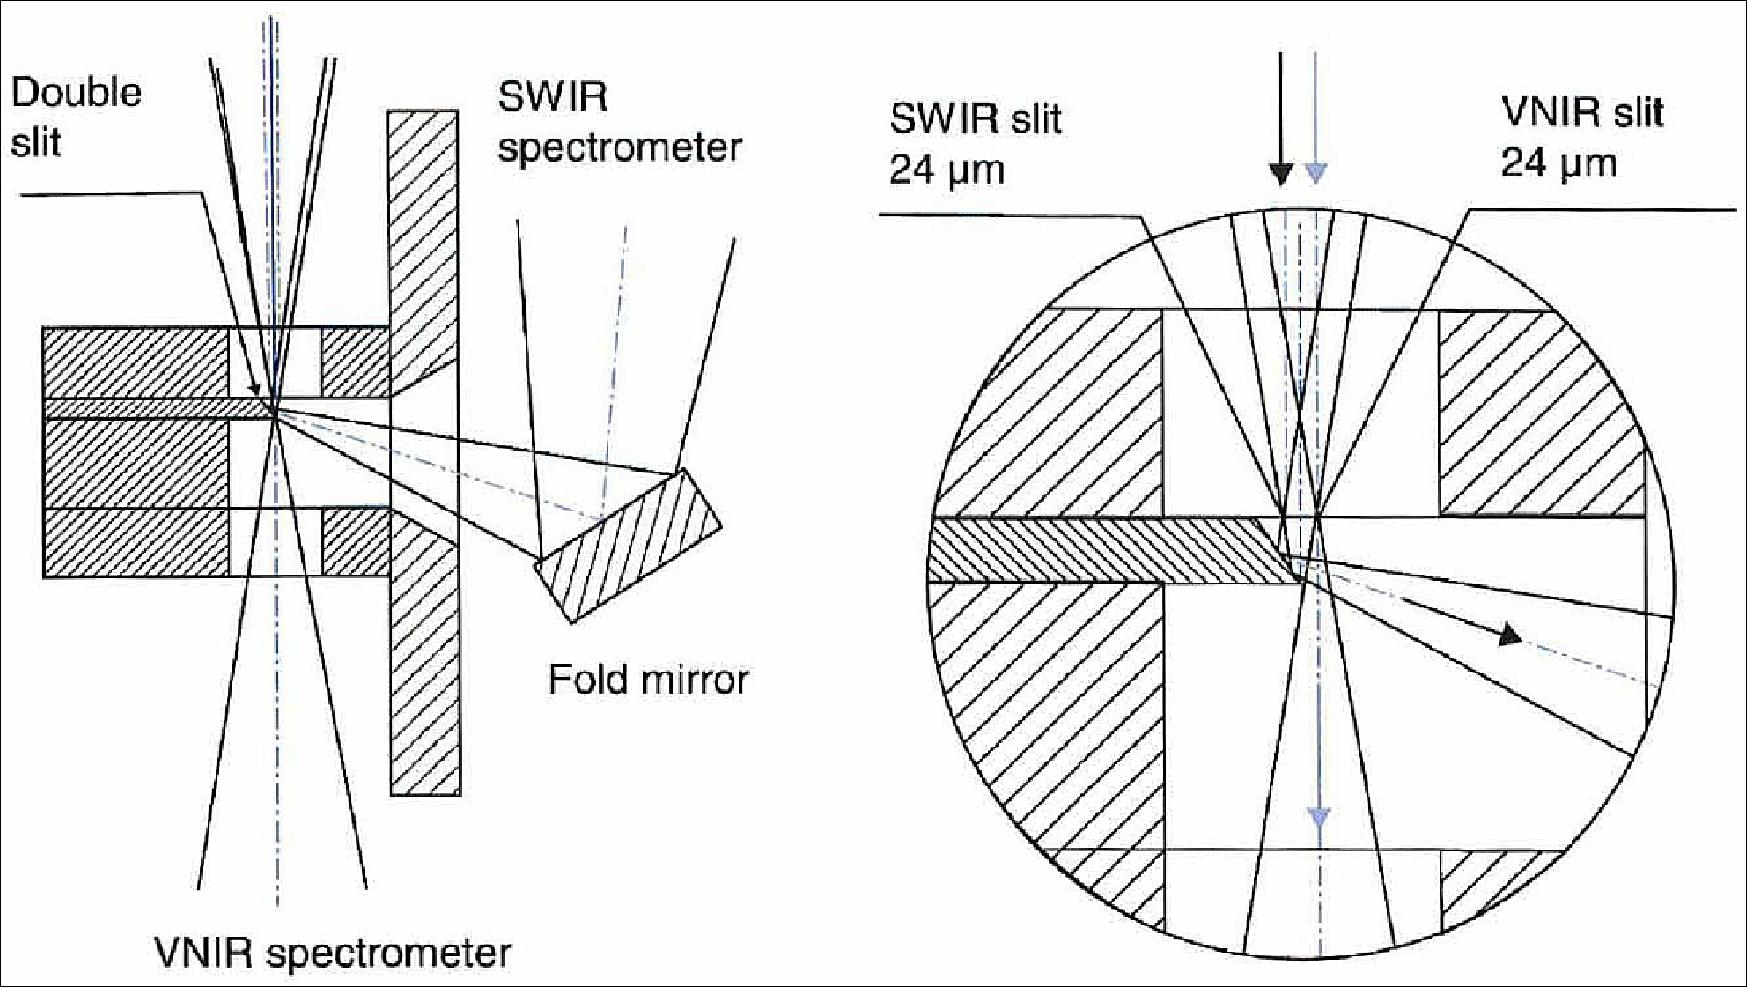 Figure 25: Principle of the field-splitter unit. Light from the telescope enters the unit from the top. After passing through two 24 µm wide slits separated by 480 µm, the radiation for the SWIR spectrometer is redirected by a gold coated micro-mirror to achieve beam separation (see detail). Tue VNIR is passed to the spectrometer without further reflection (image credit: OHB)